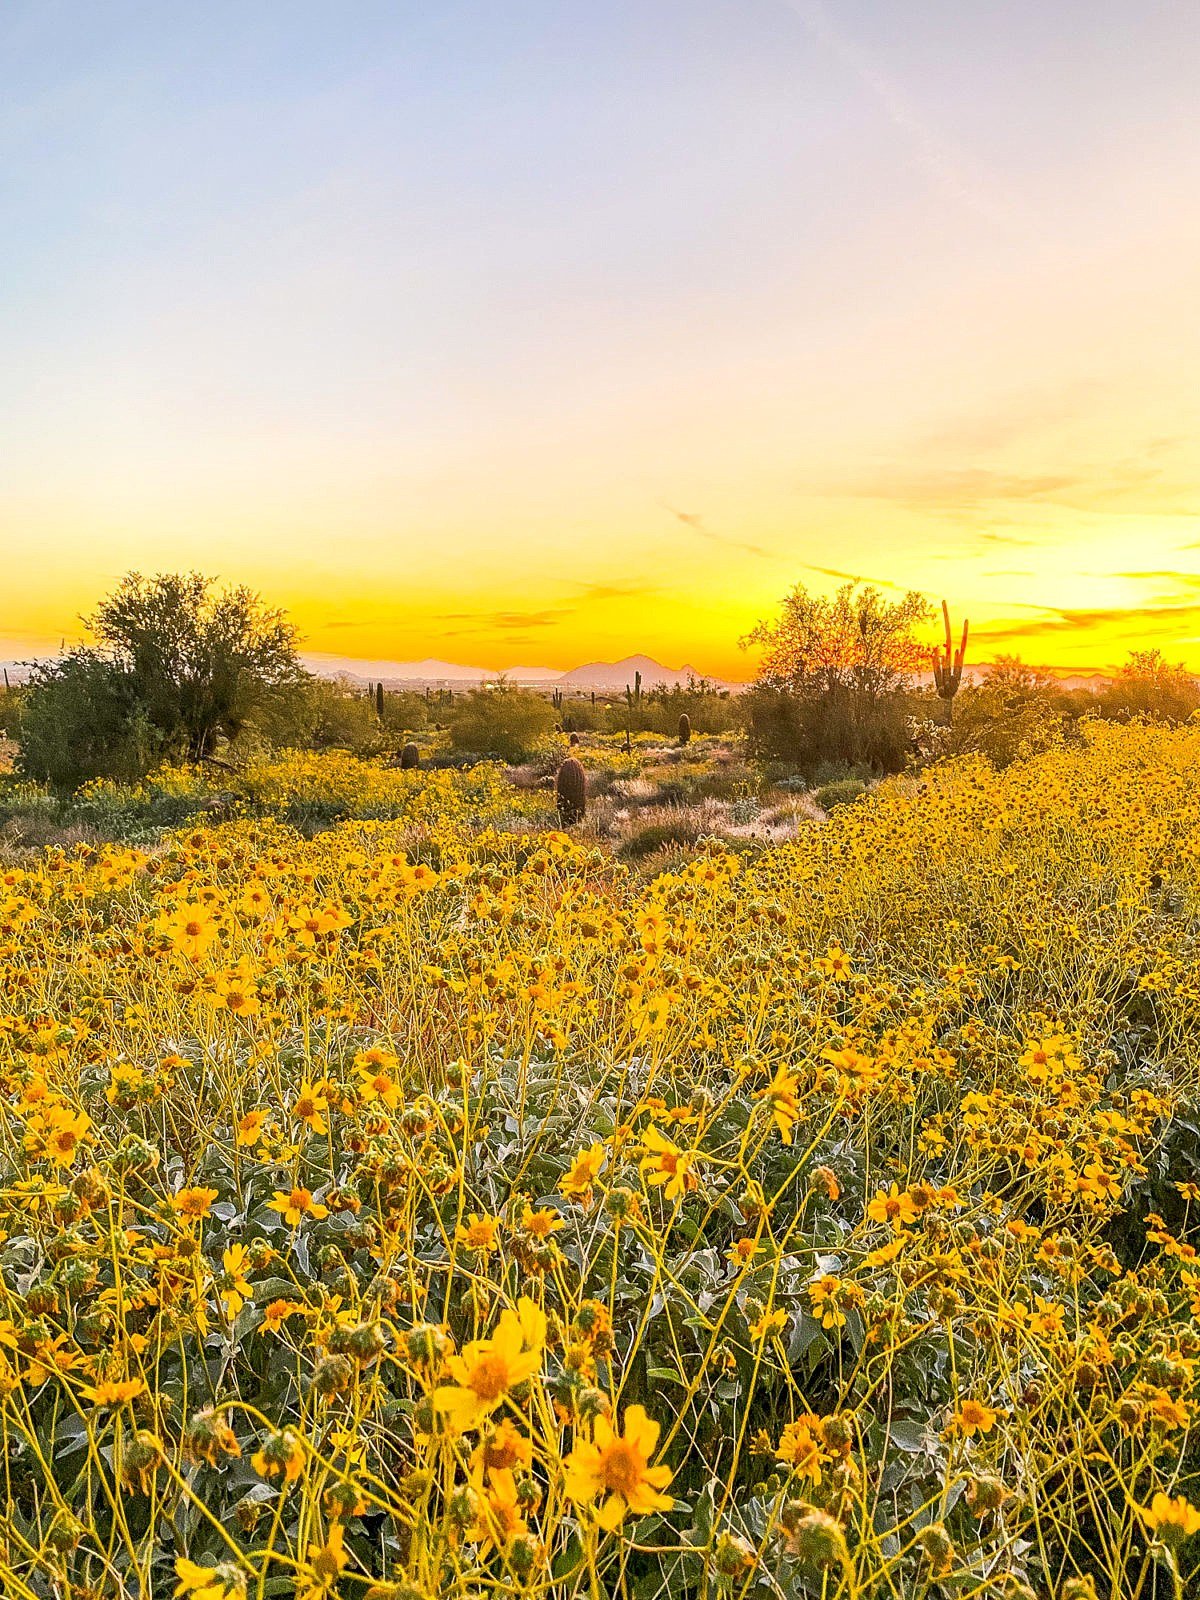 Yellow field of flowers in the desert